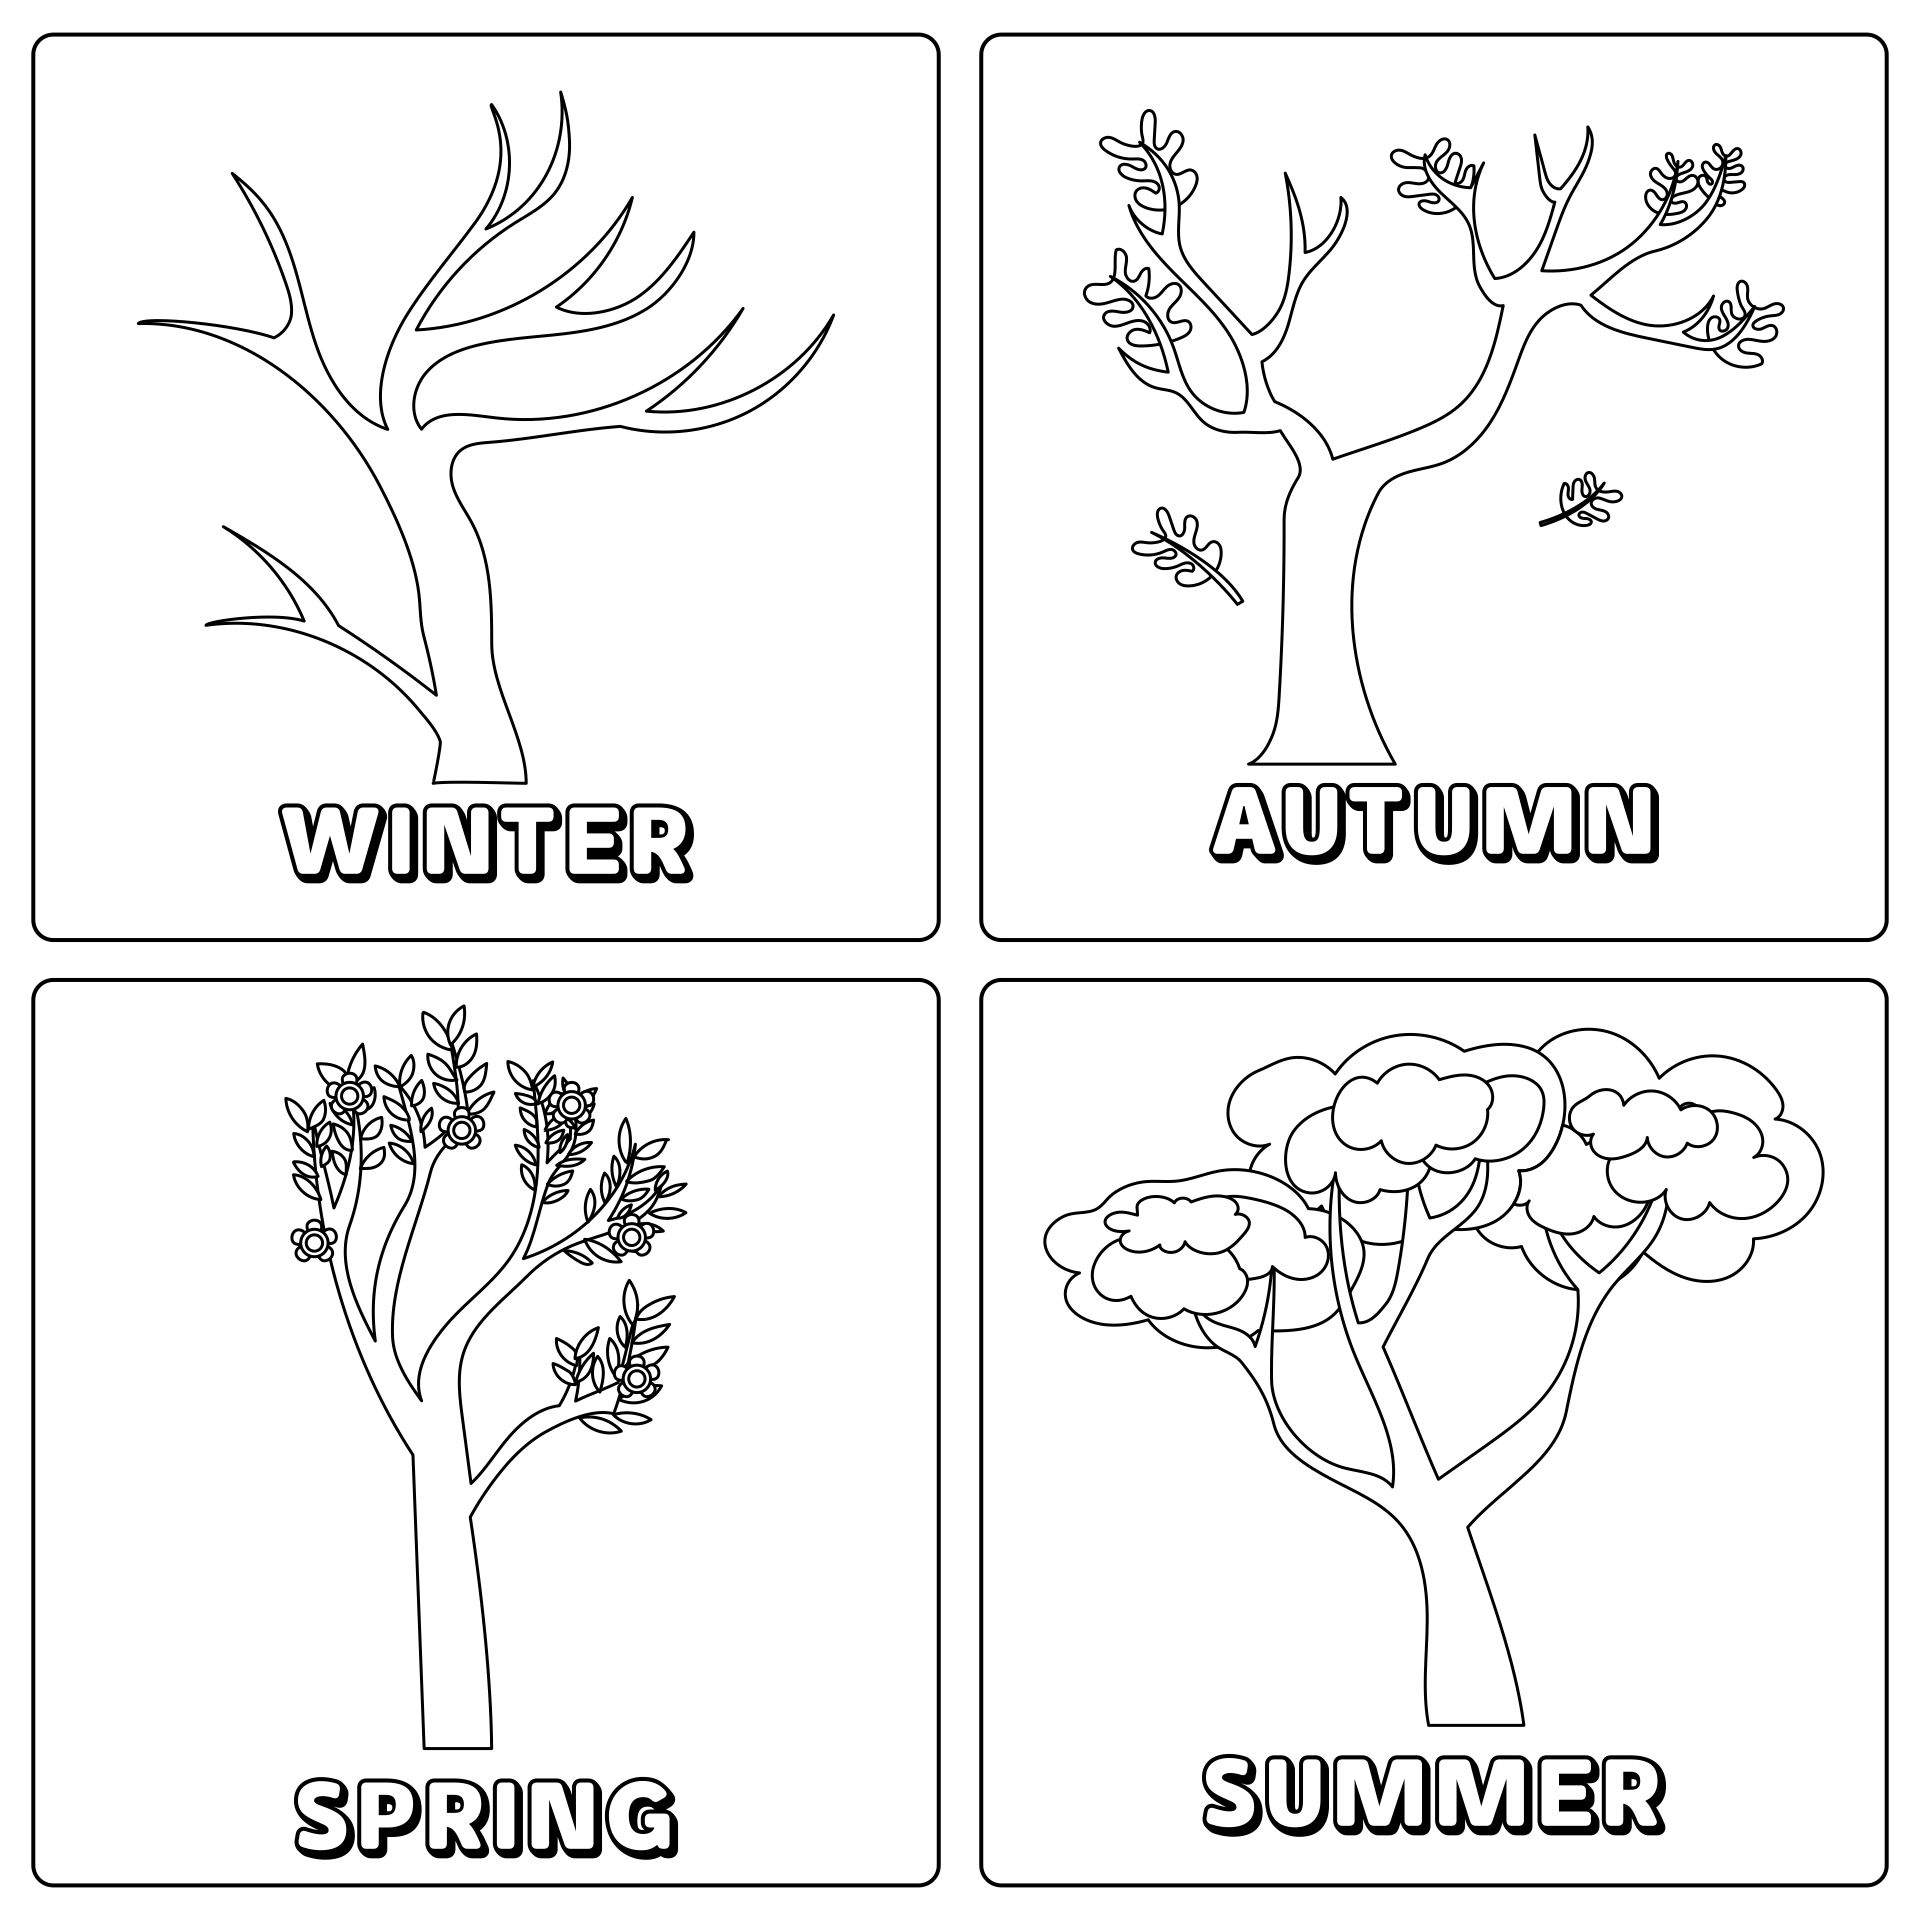 Four Seasons Tree Coloring Page